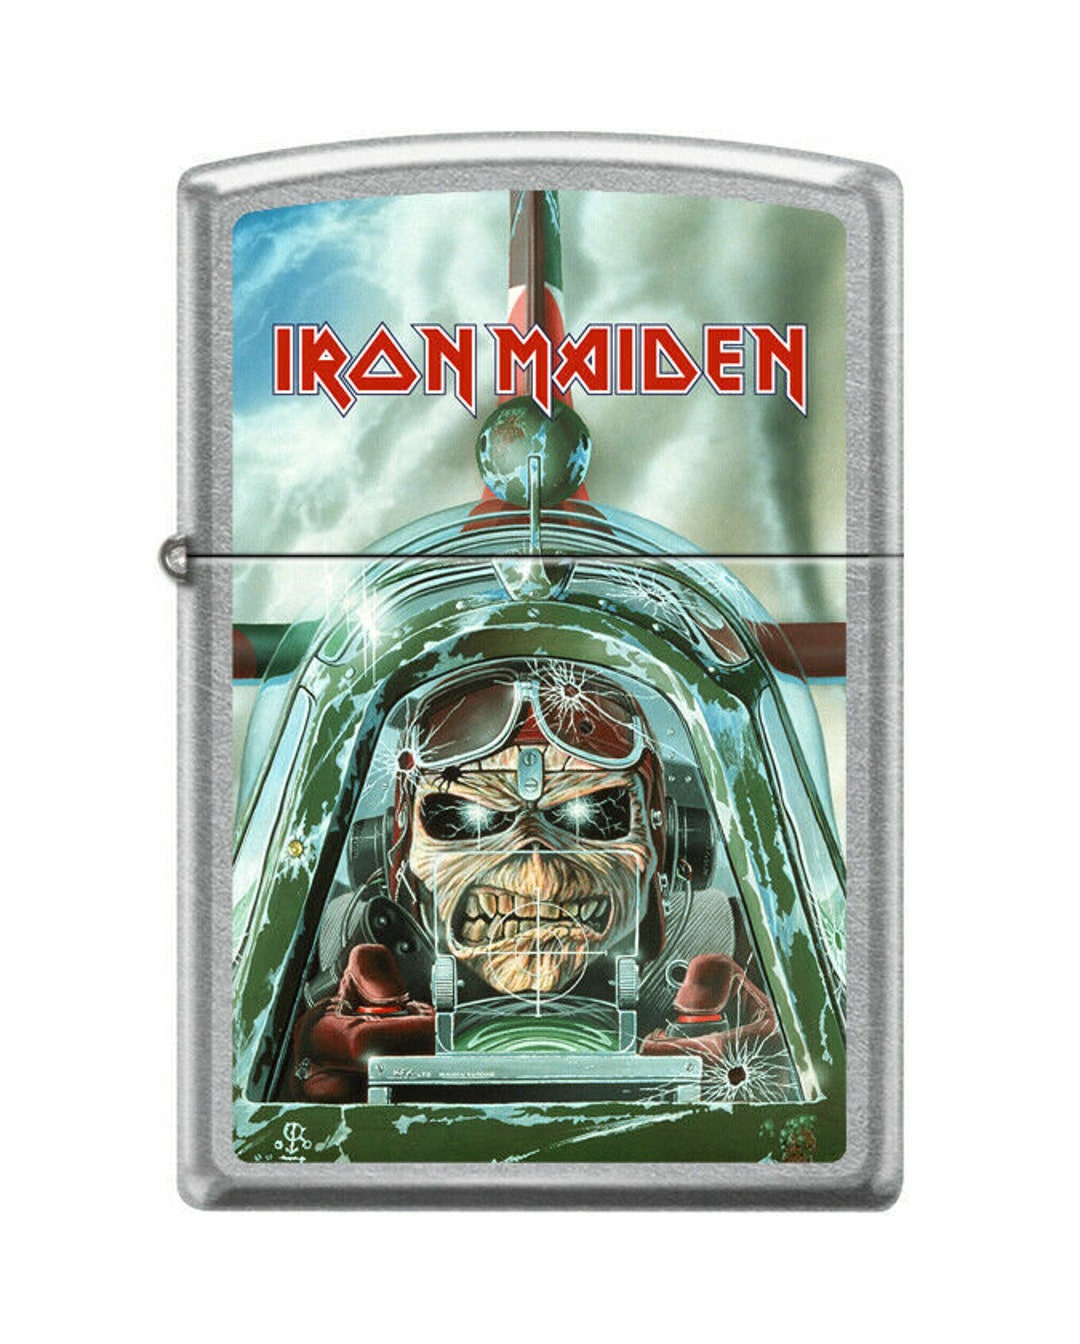 Collectable Iron Maiden Fighter Pilot Zippo Lighter - Etsy